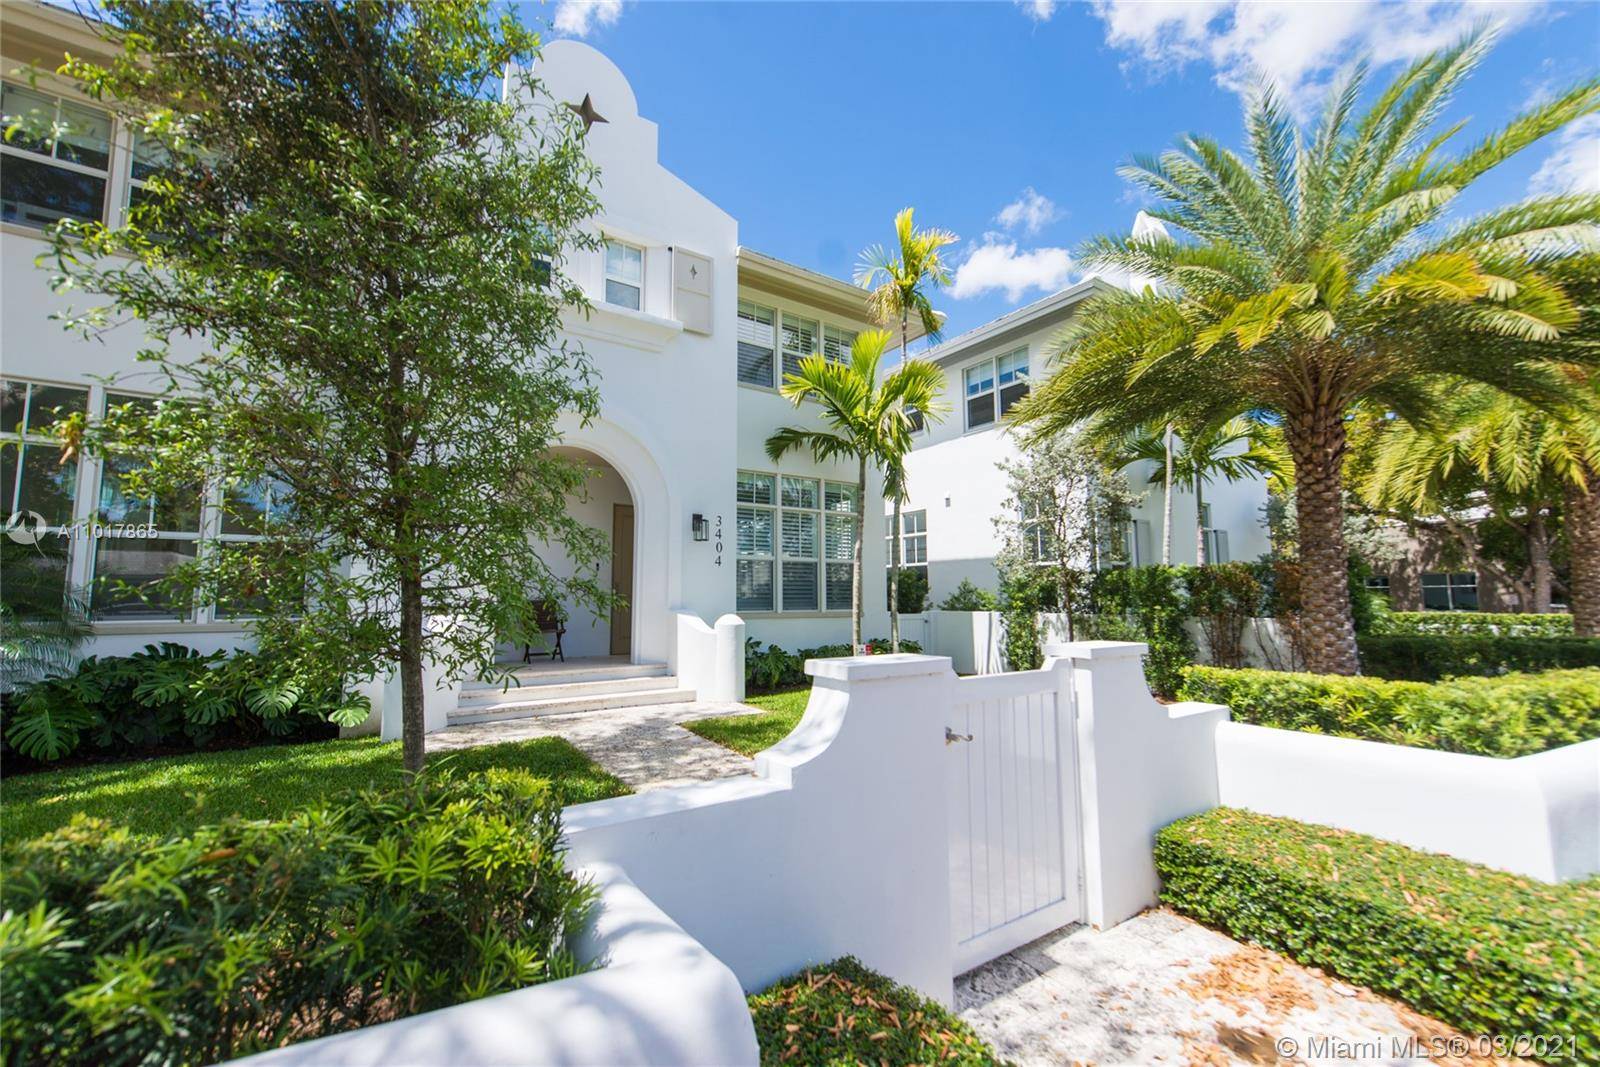 Sophisticated and immaculate, this central Coral Gables townhome is ready to impress.